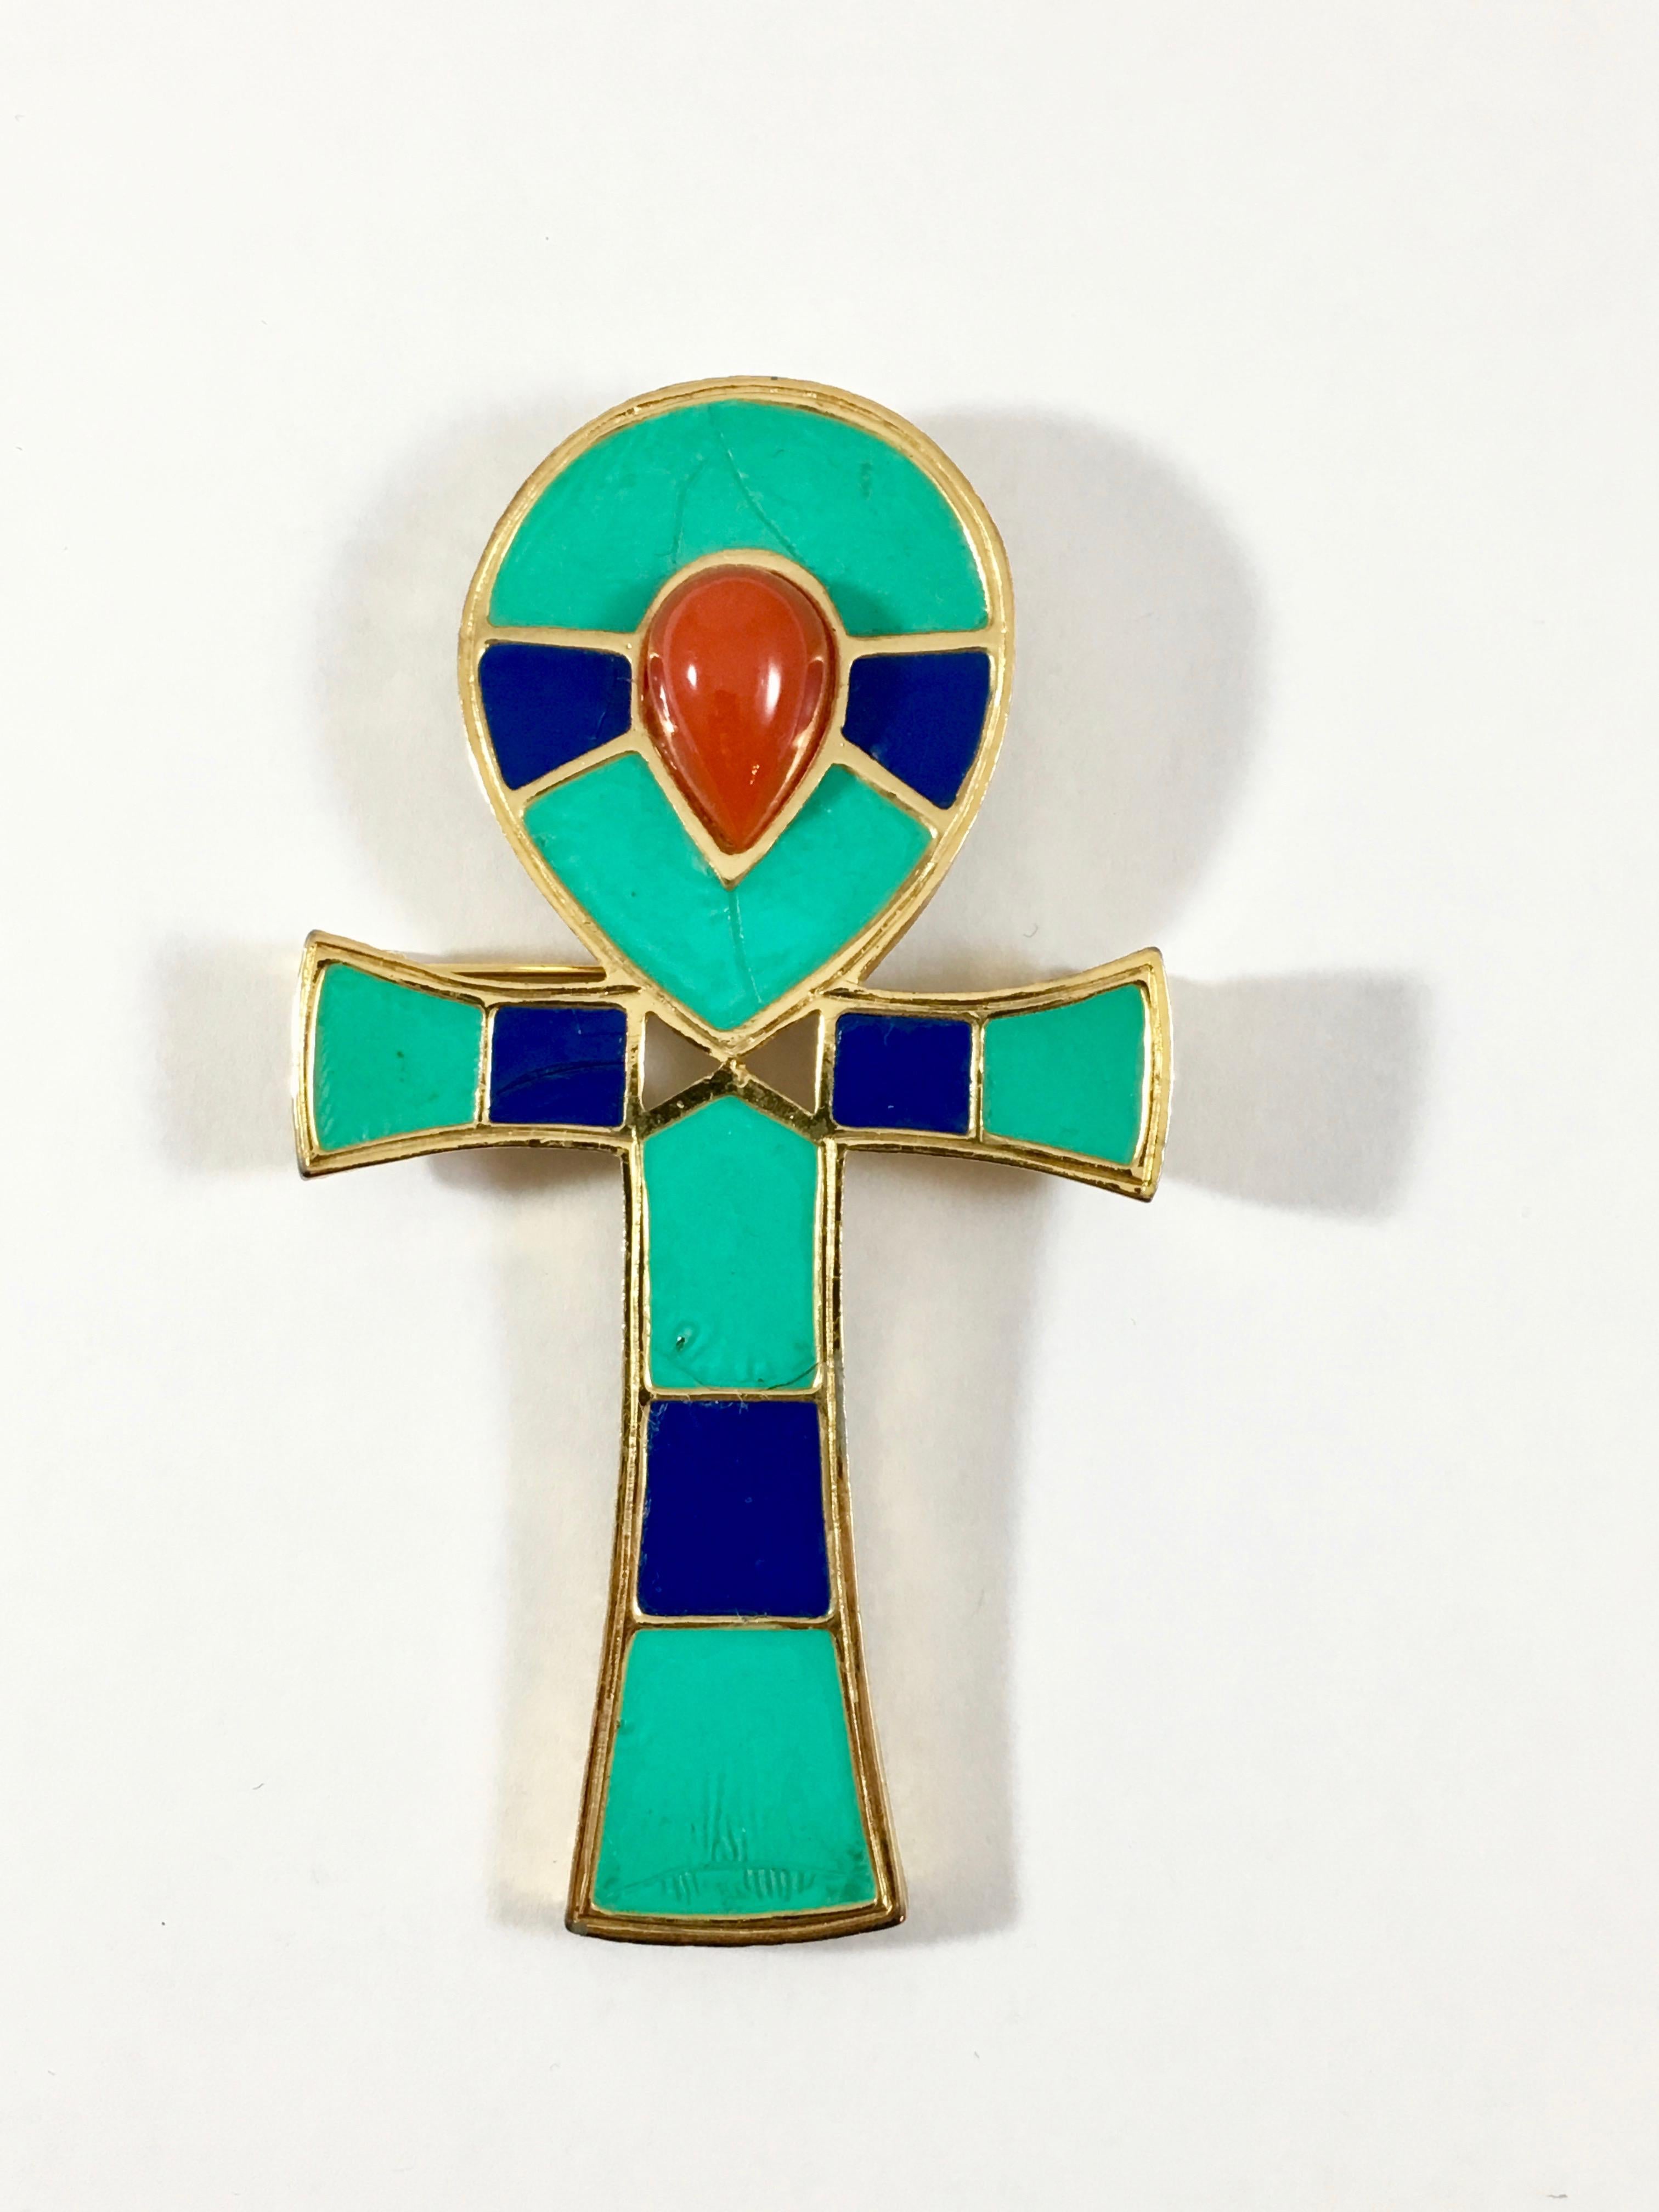 This is a fabulous 1960s Hattie Carnegie Egyptian Ankh brooch which can also be worn as a pendant. An ankh was the ancient Egyptian hieroglyphic character that symbolized 